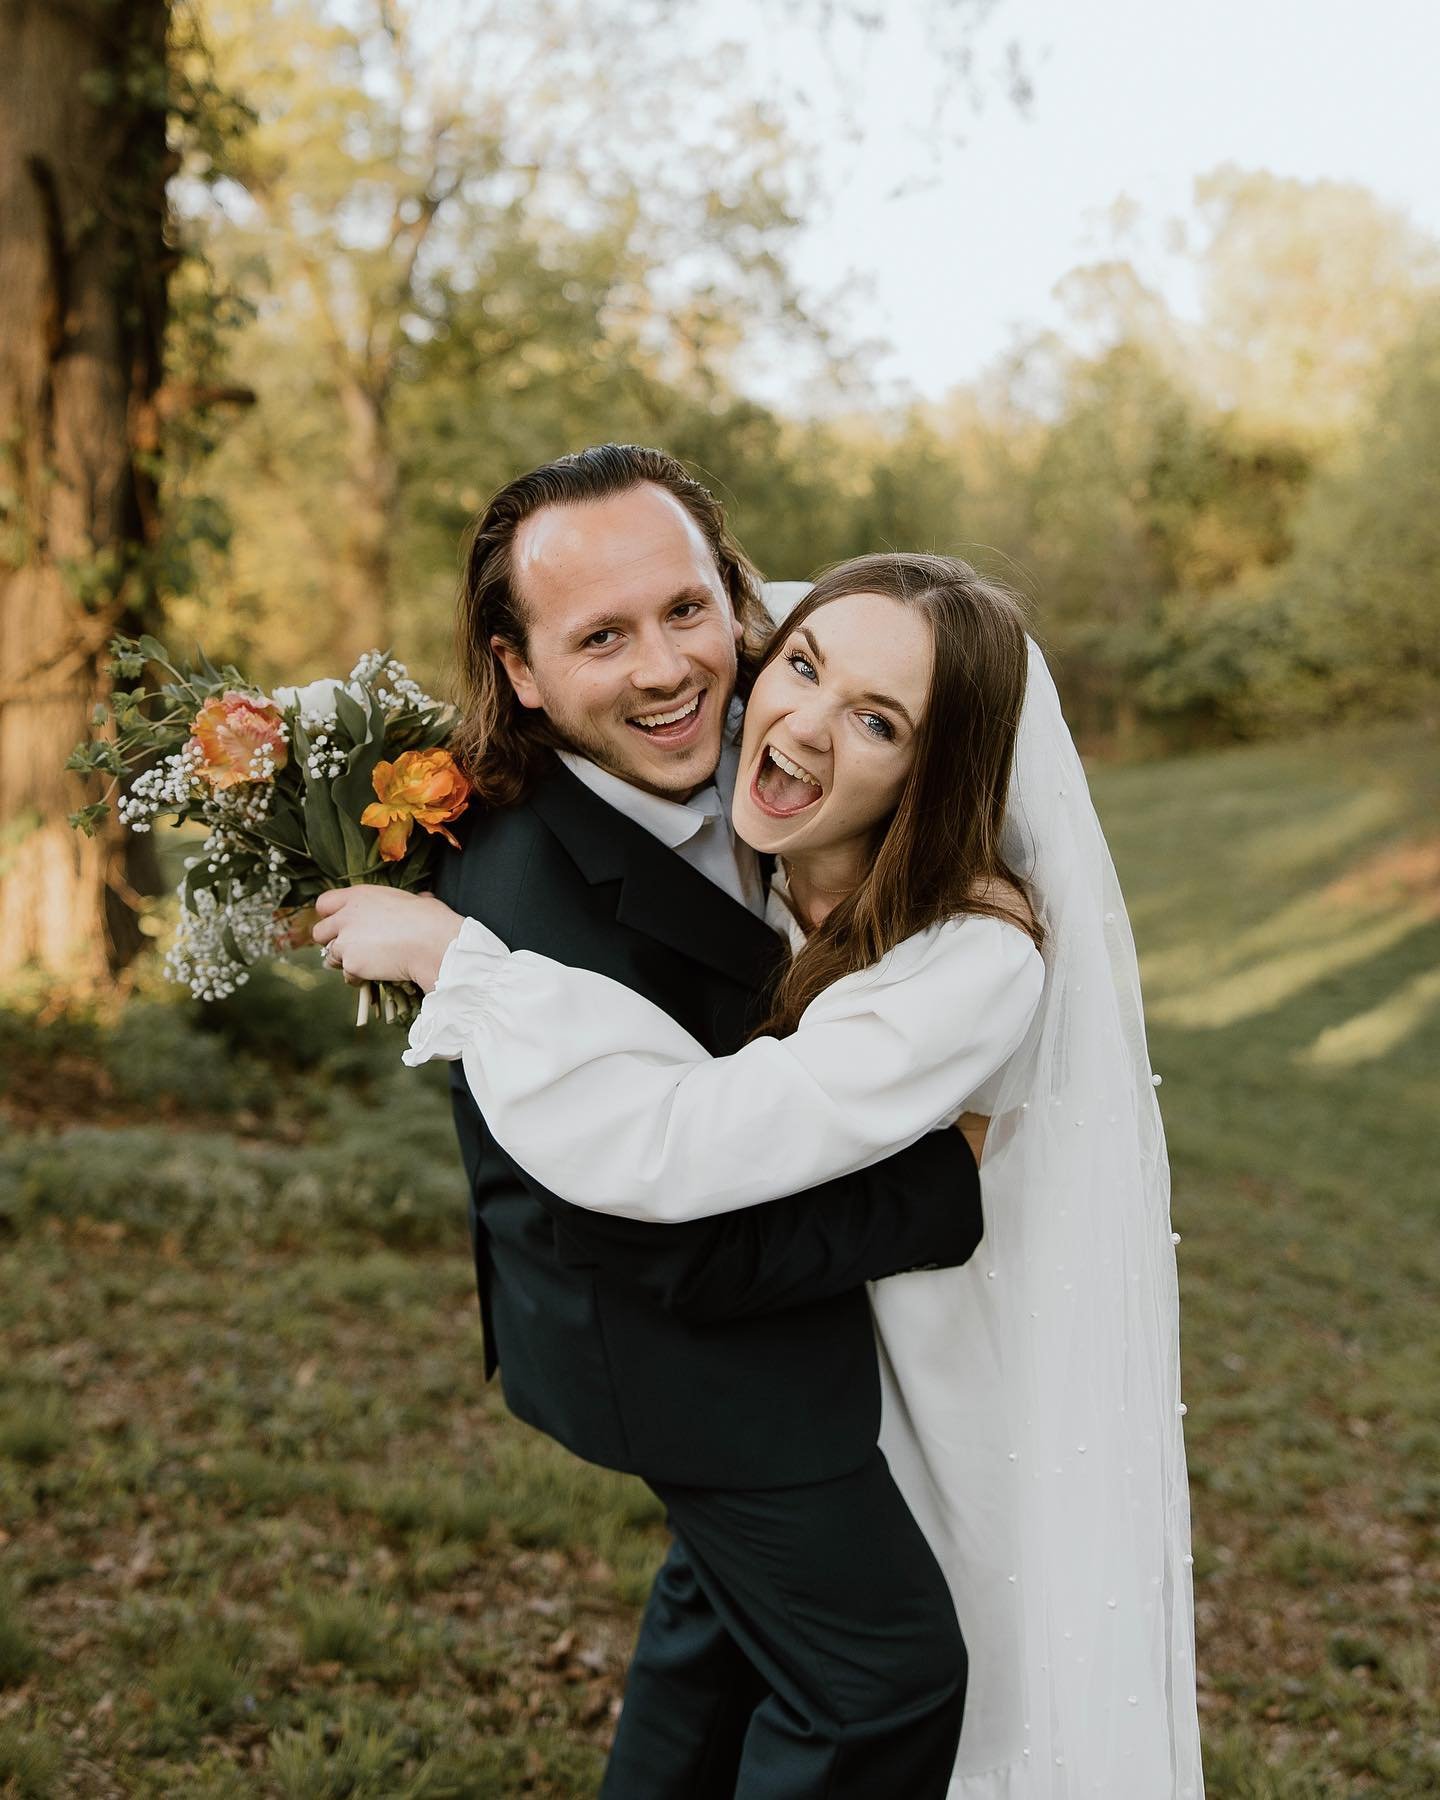 My favorite part about elopements? There are no rules &mdash; You get to decide where, how, and when you want to start your forever. Always a big fan of ditching tradition and embracing adventure with the person you love the most 🕊️